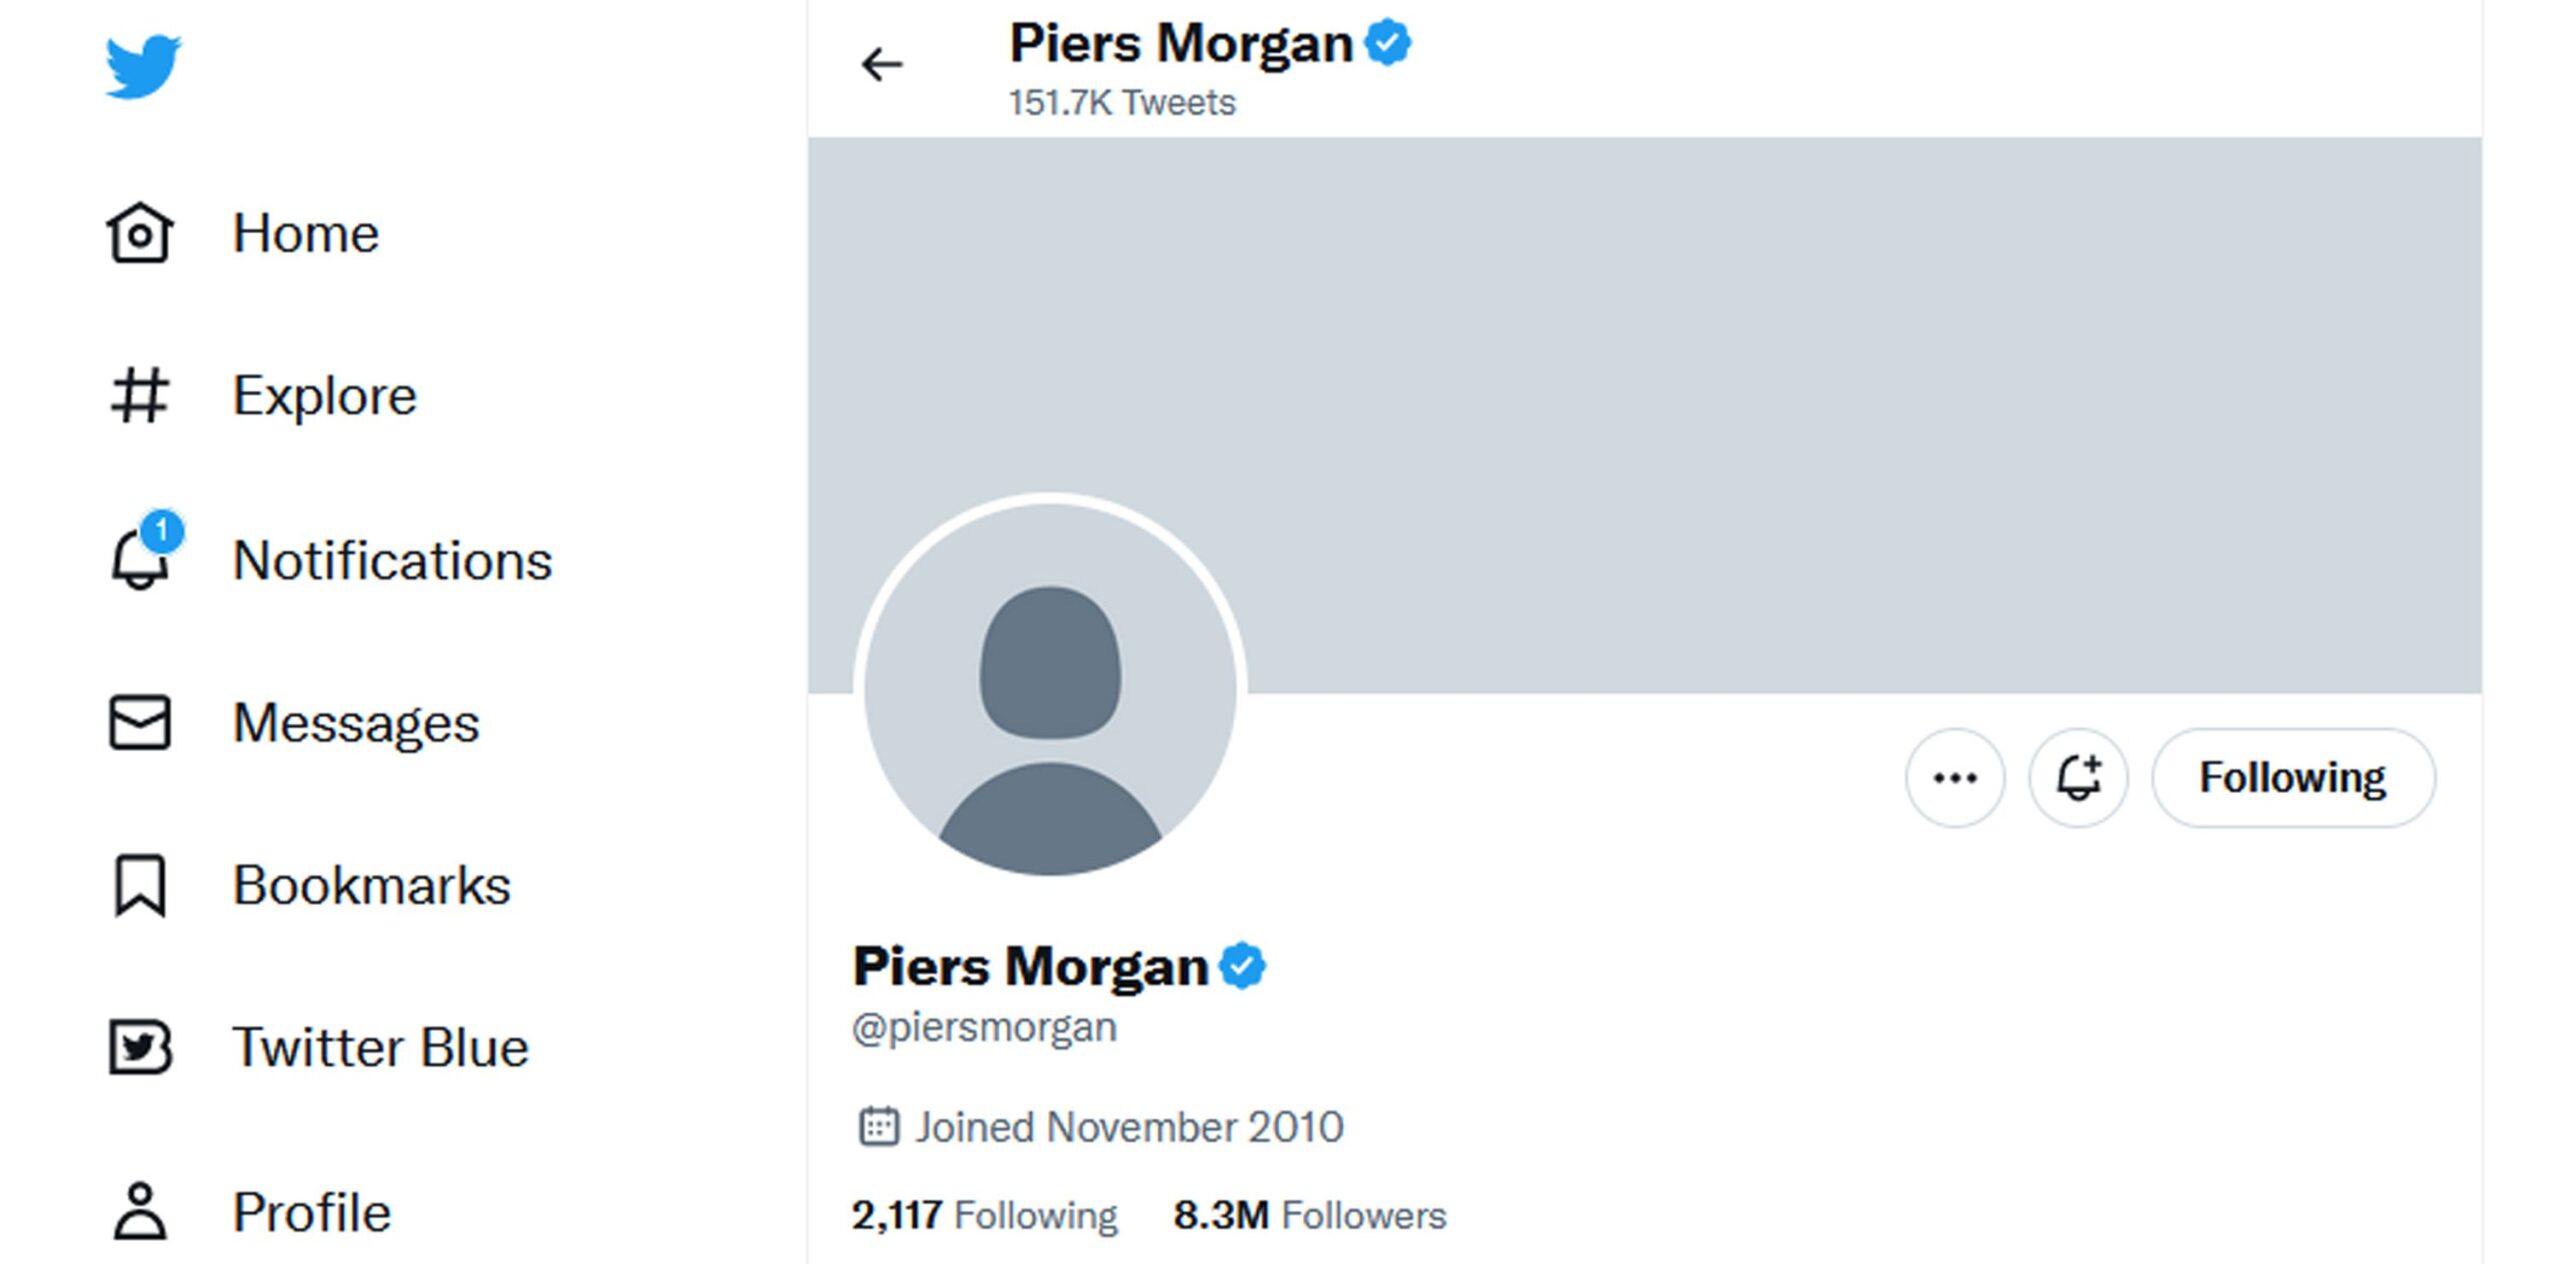 Piers Morgan and Twitter